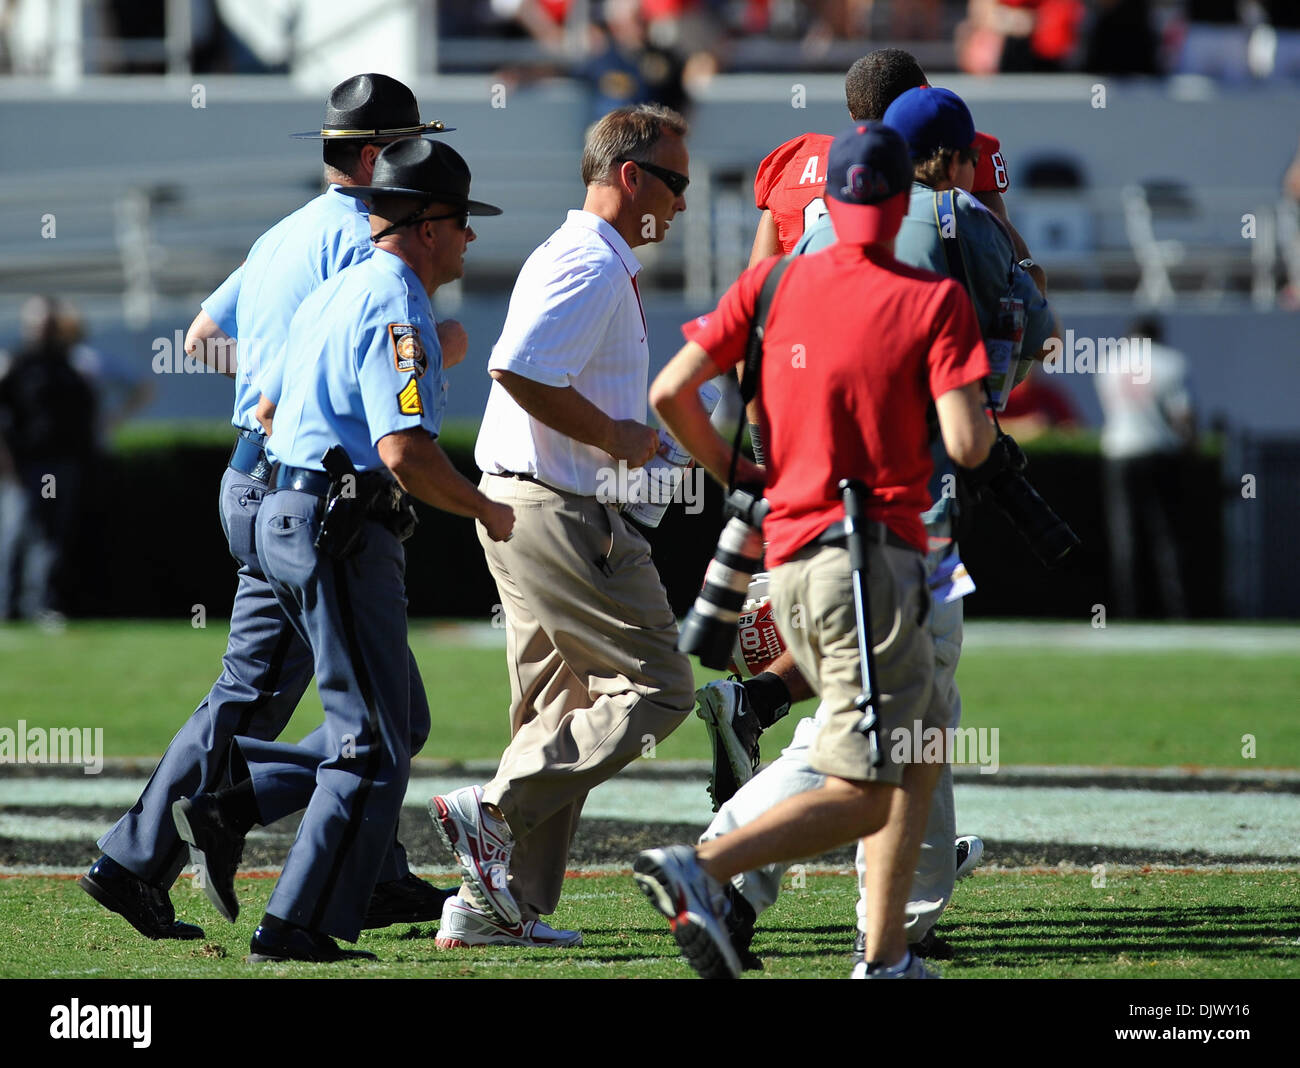 Oct. 16, 2010 - Athens, Georgia, United States of America - Georgia head coach Mark Richt is escorted to midfield for the post game hand shake between head coaches after SEC Football action between Vanderbilt and Georgia. Georgia defeated Vanderbilt 43-0 in the game at Sanford Stadium in Athens, GA. (Credit Image: © David Douglas/Southcreek Global/ZUMApress.com) Stock Photo